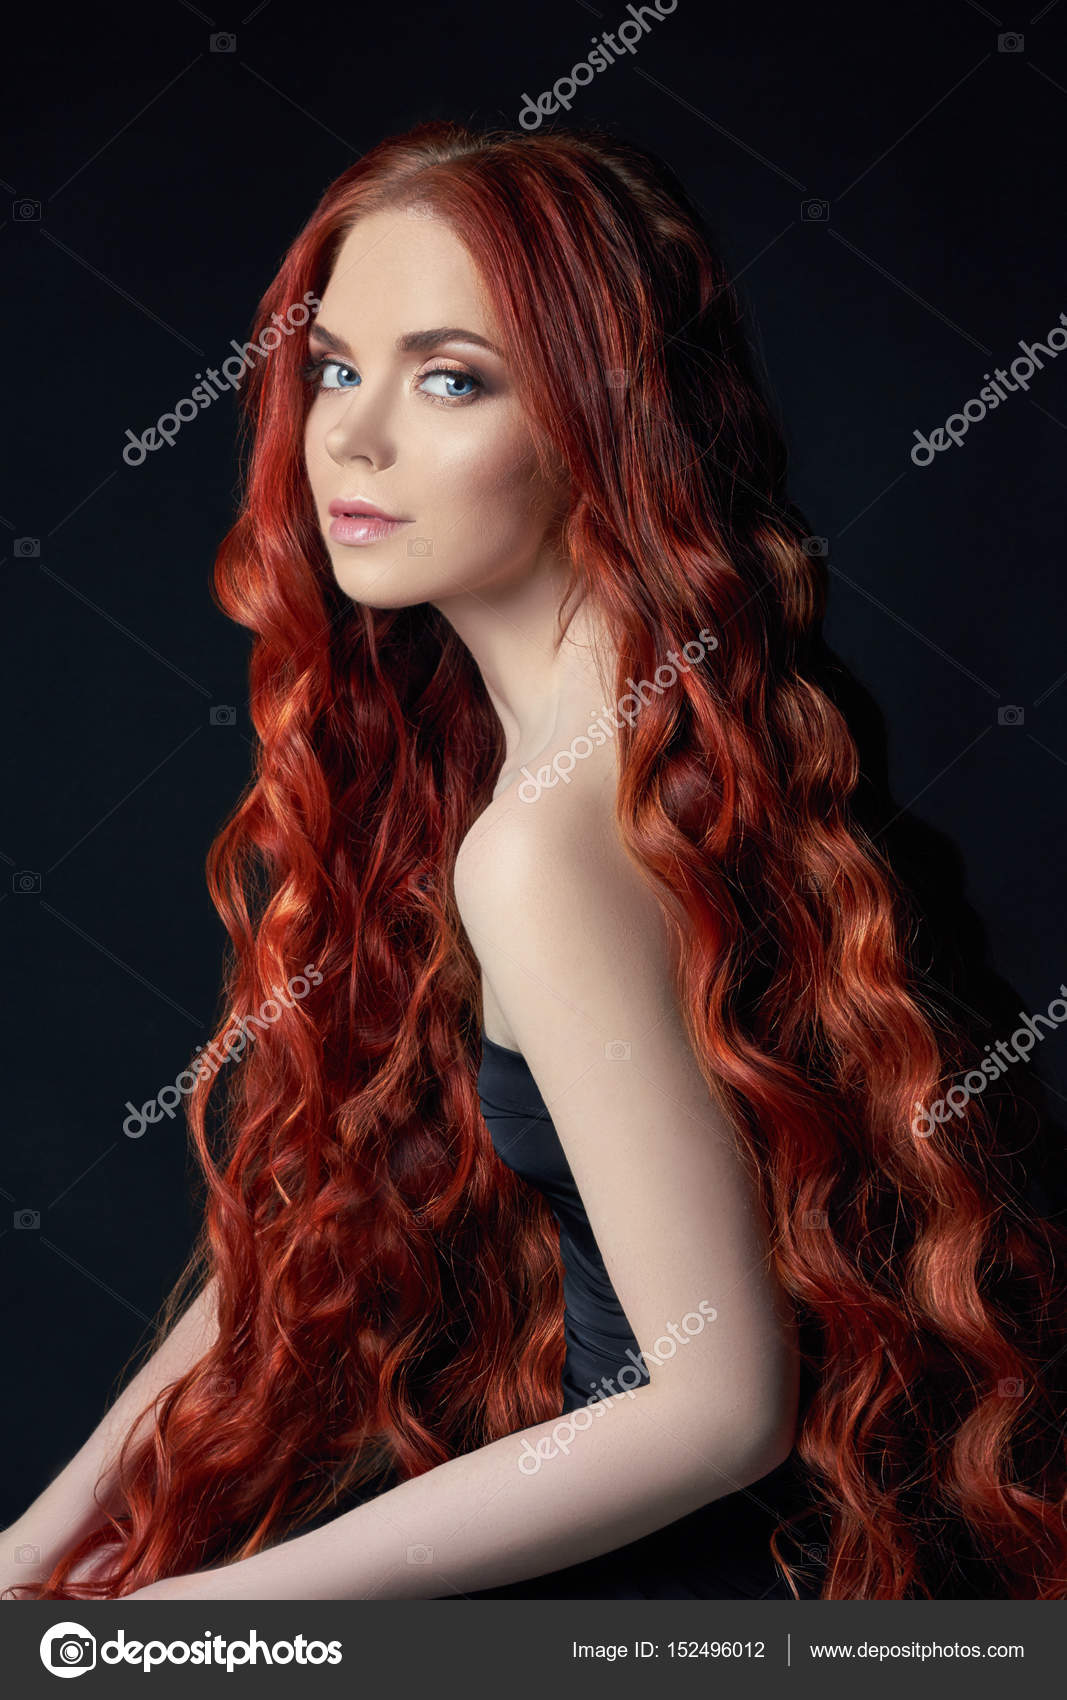 Sexy Beautiful Redhead Girl With Long Hair Perfect Woman Portrait On Black Background Gorgeous